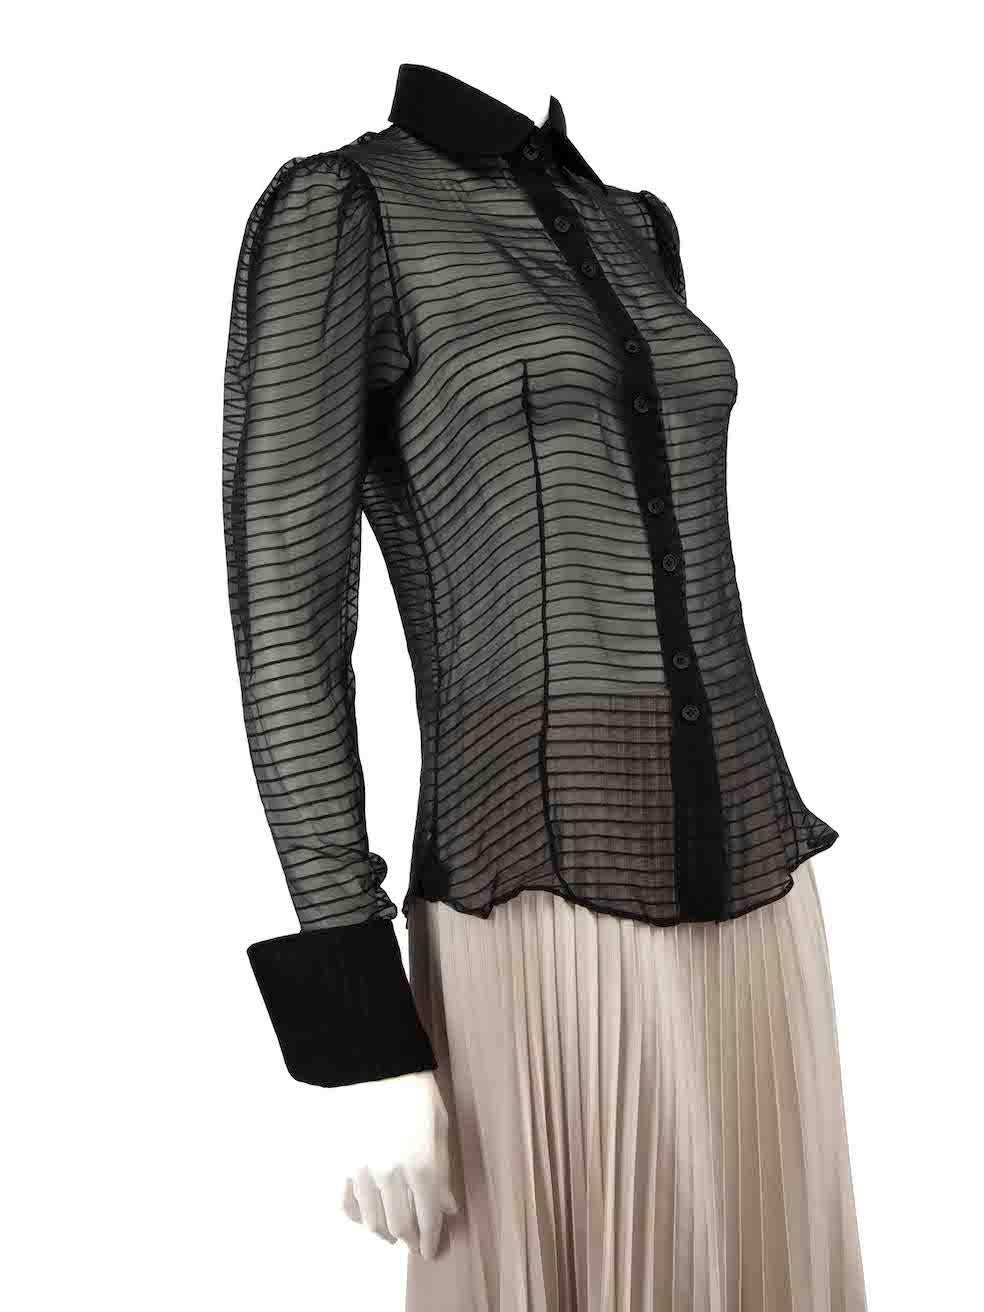 CONDITION is Good. Minor wear to shirt is evident. Light wear to hem with a small hole on this used Stella McCartney designer resale item.
 
Details
Black
Silk
Long sleeves blouse
Striped pattern
Sheer
Front button up closure
Buttoned